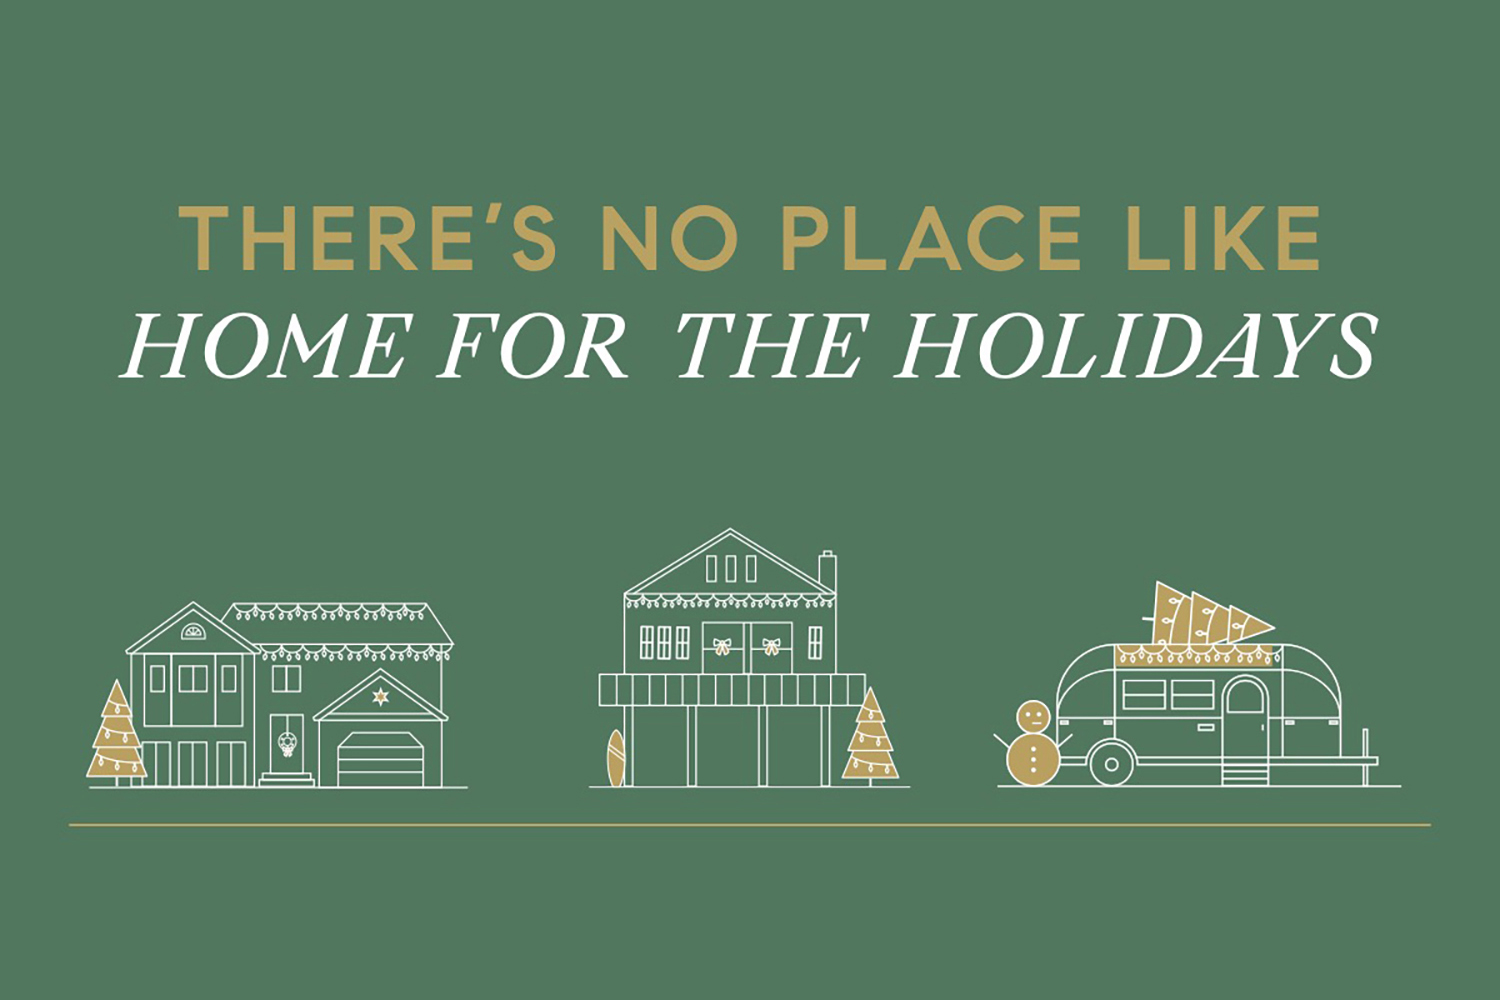 There's No Place Like Home for the Holidays banner